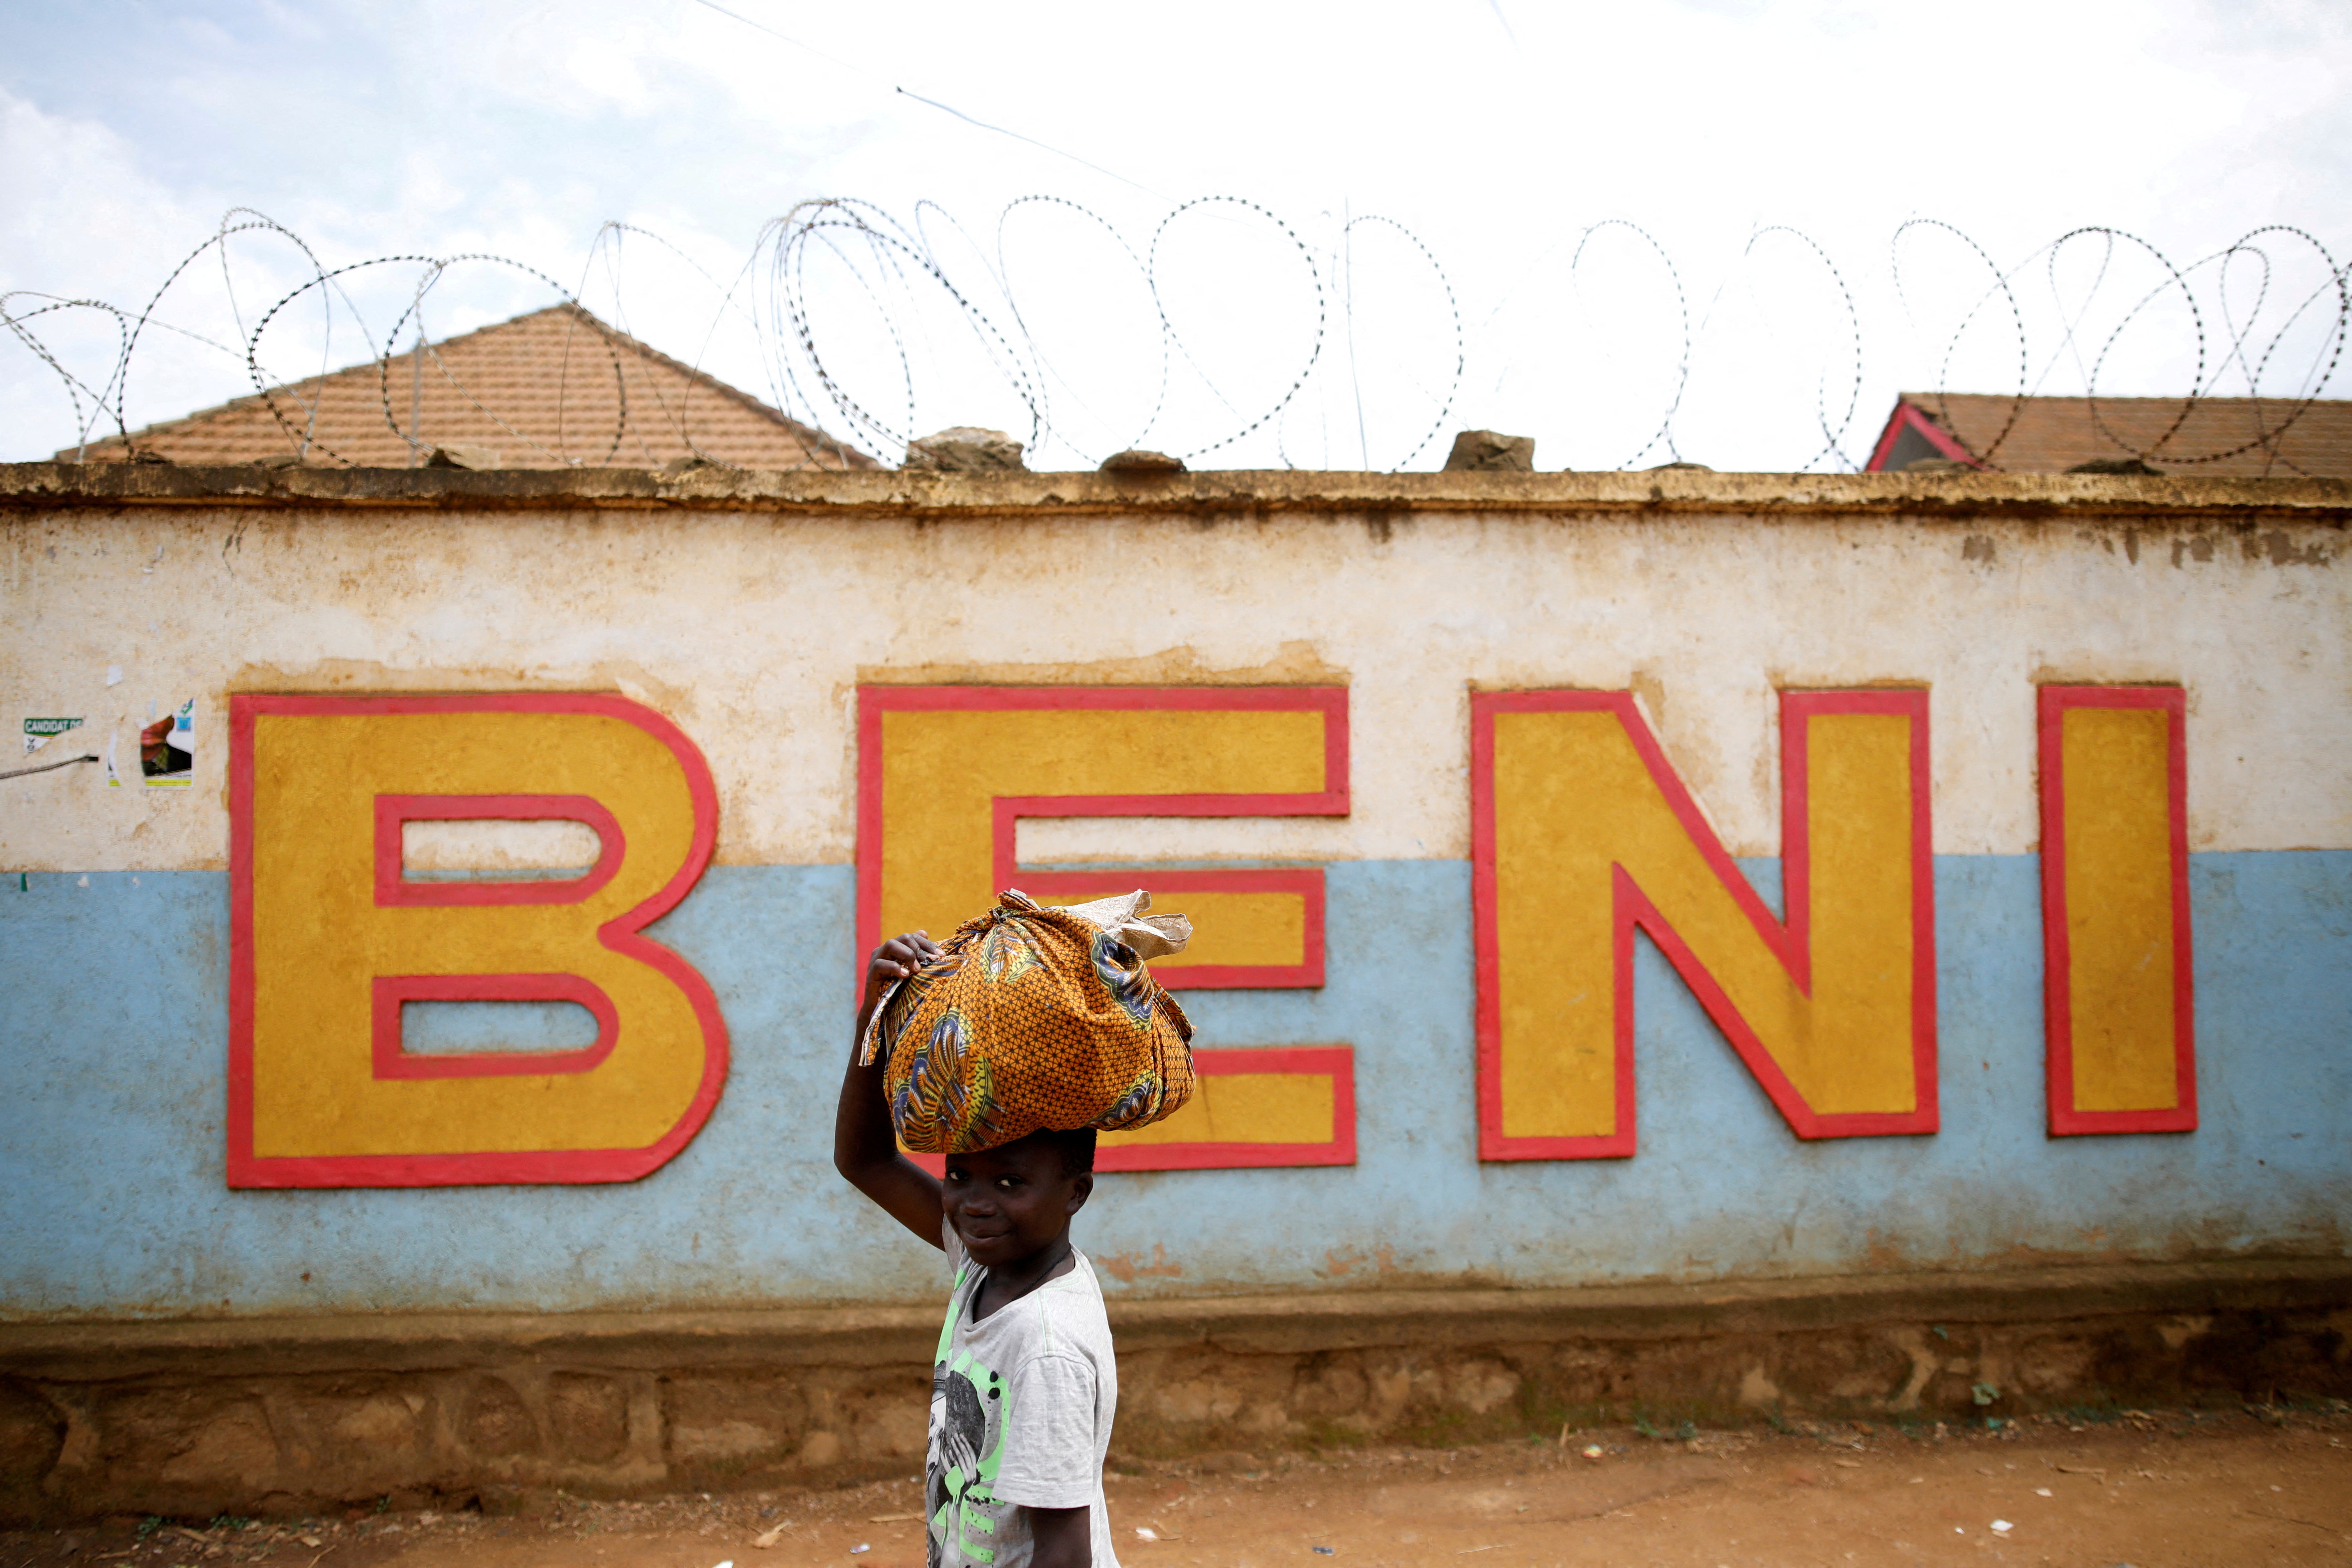 A Congolese boy walks past a wall in Beni, in the Democratic Republic of Congo, April 1, 2019. Picture taken April 1, 2019.REUTERS/Baz Ratner/File Photo